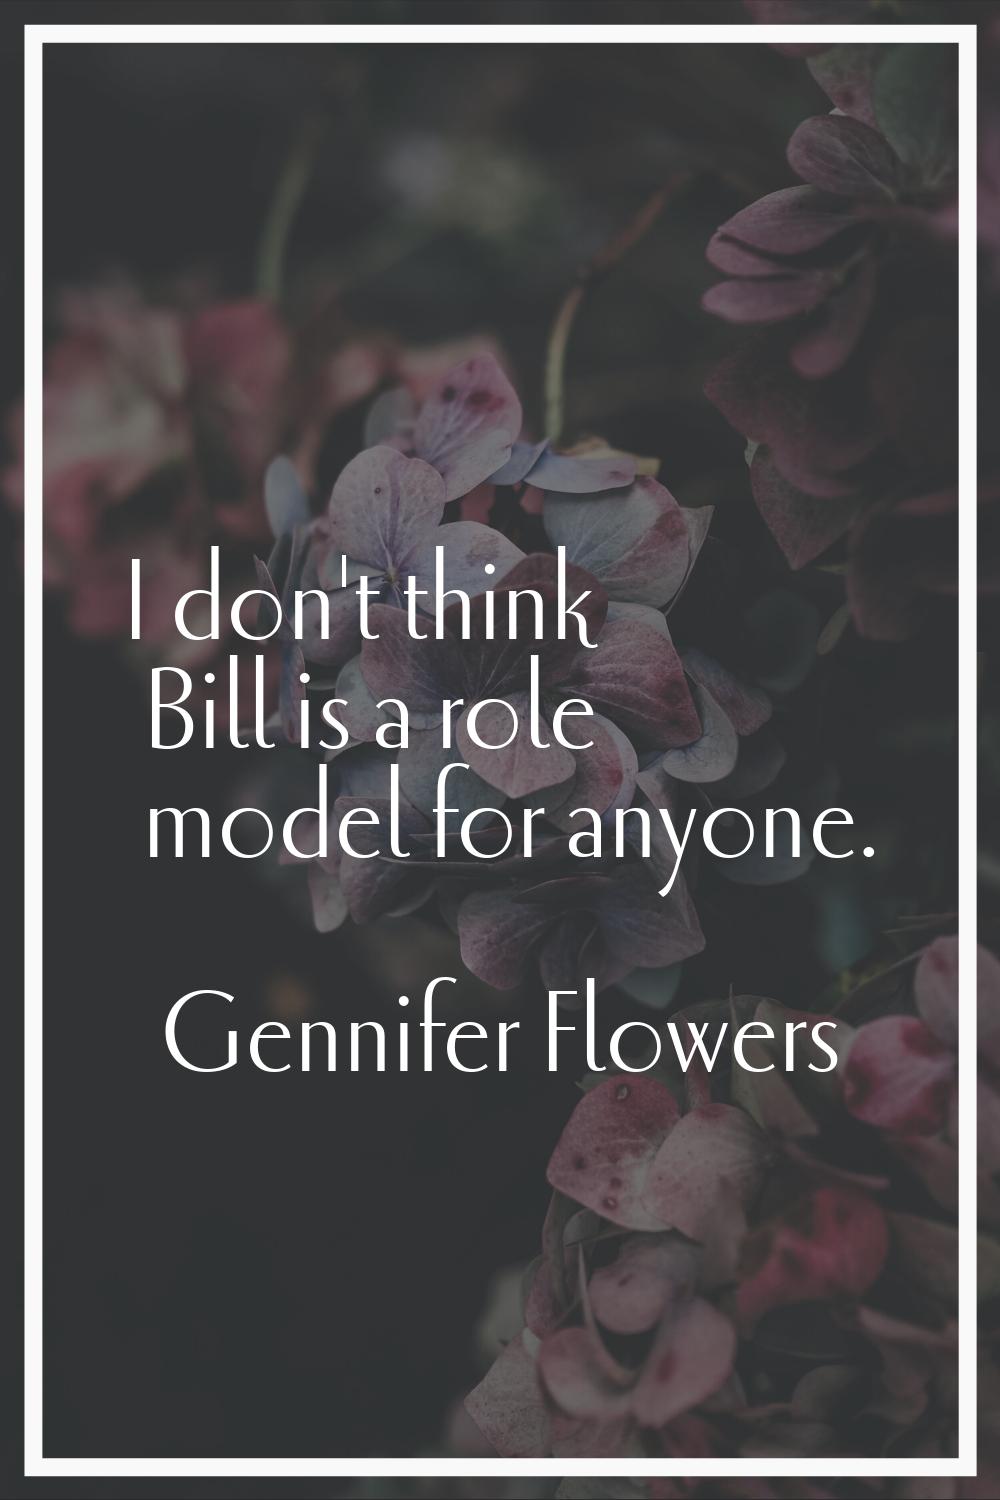 I don't think Bill is a role model for anyone.